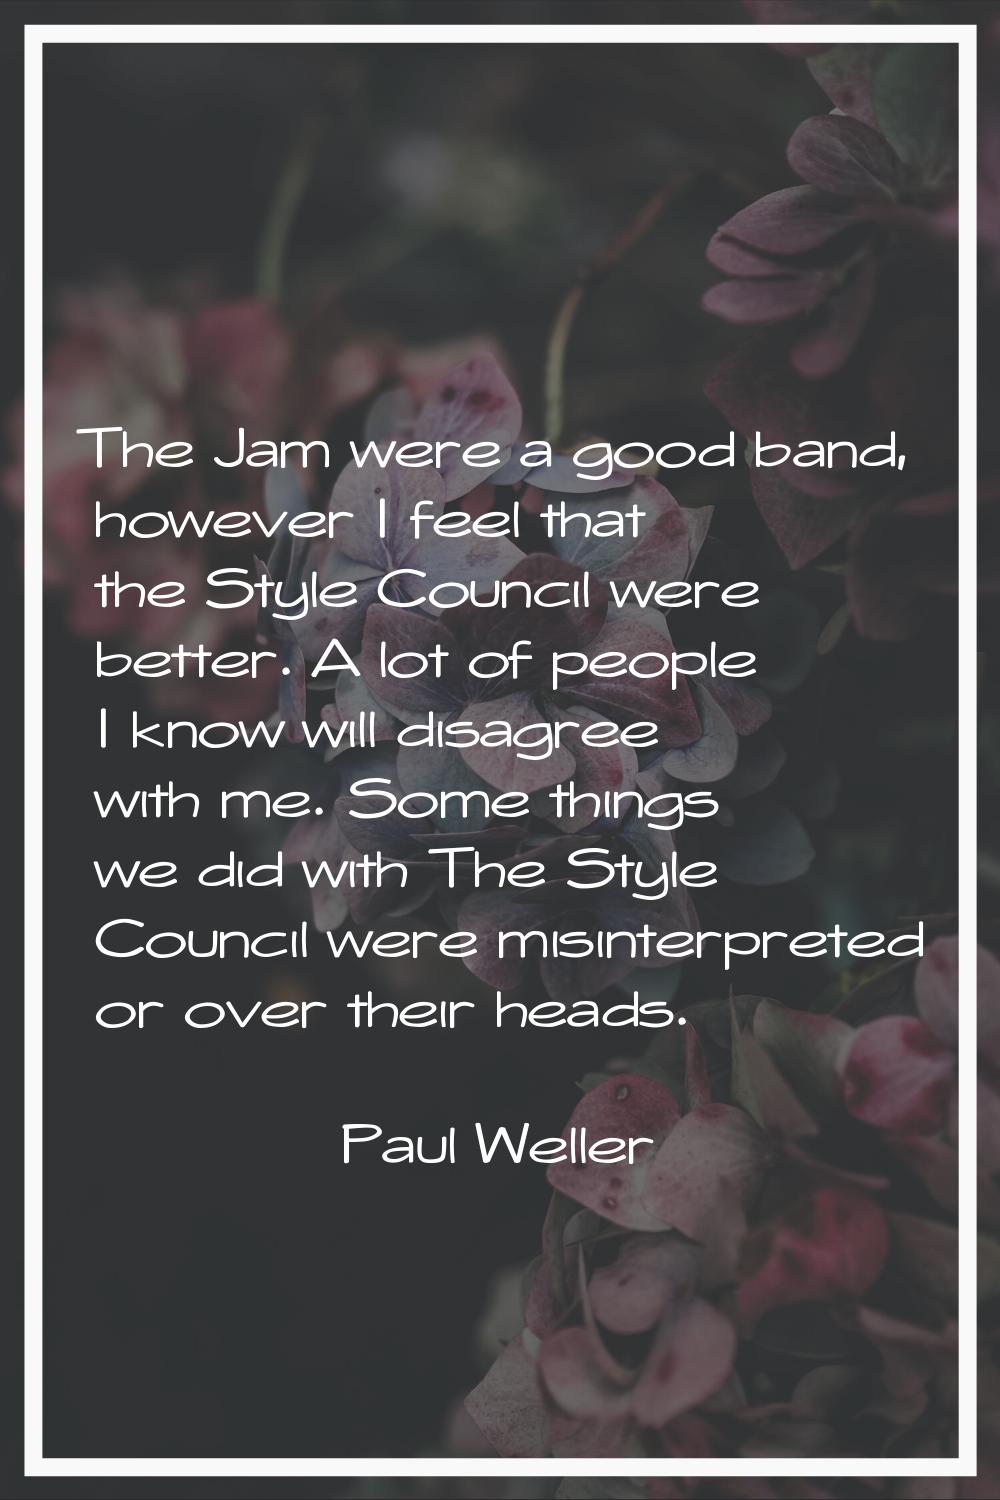 The Jam were a good band, however I feel that the Style Council were better. A lot of people I know